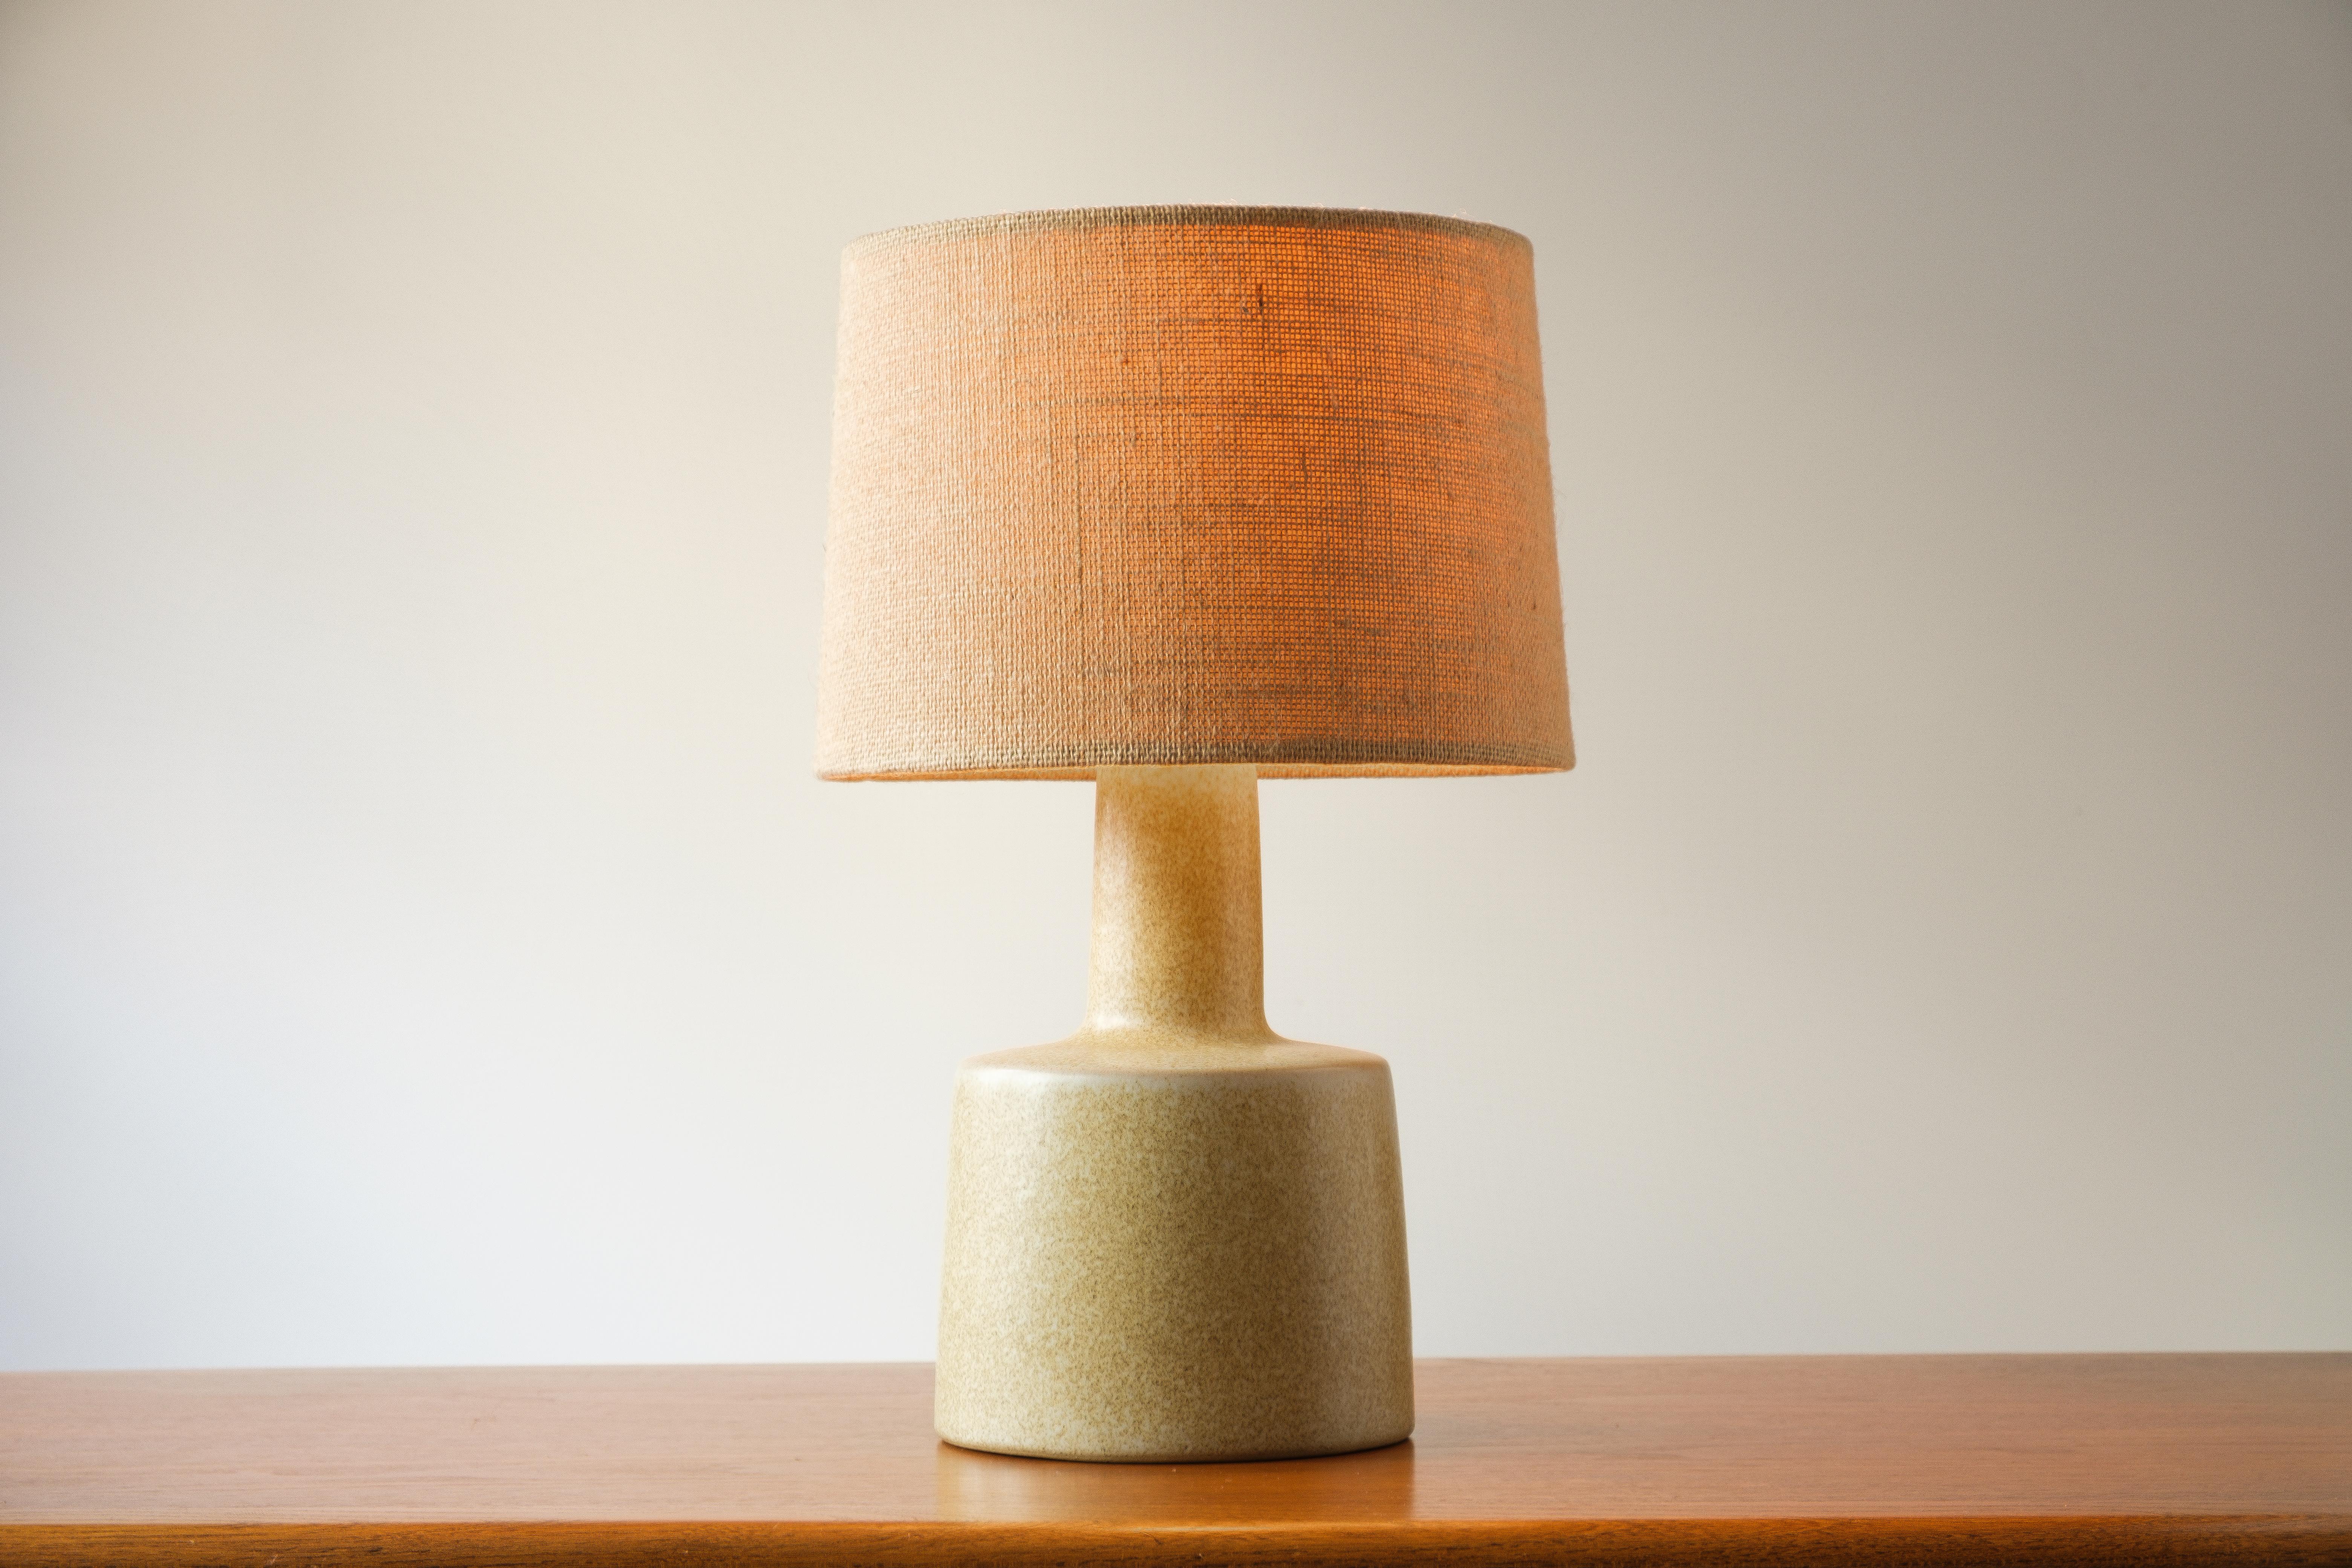 What is it?
—
Another gem from the masters of mid century lightning – Gordon and Jane Martz.

This signed Martz model 105 lamp comes in a matte tan glaze with embedded textured sand. The flow of the glaze makes the sand texture thicker and